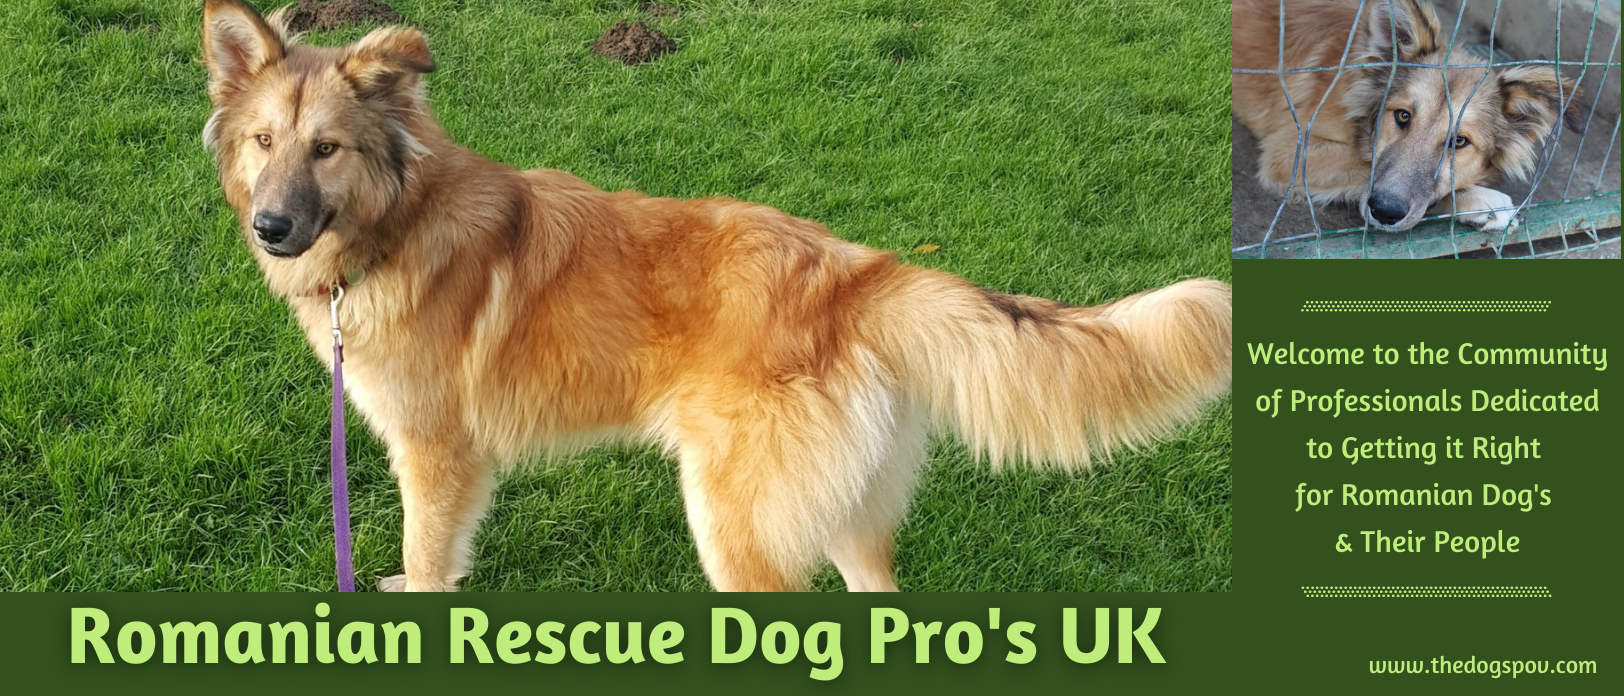 Romanian Rescue Dog Pro's UK The Dogs Point of View